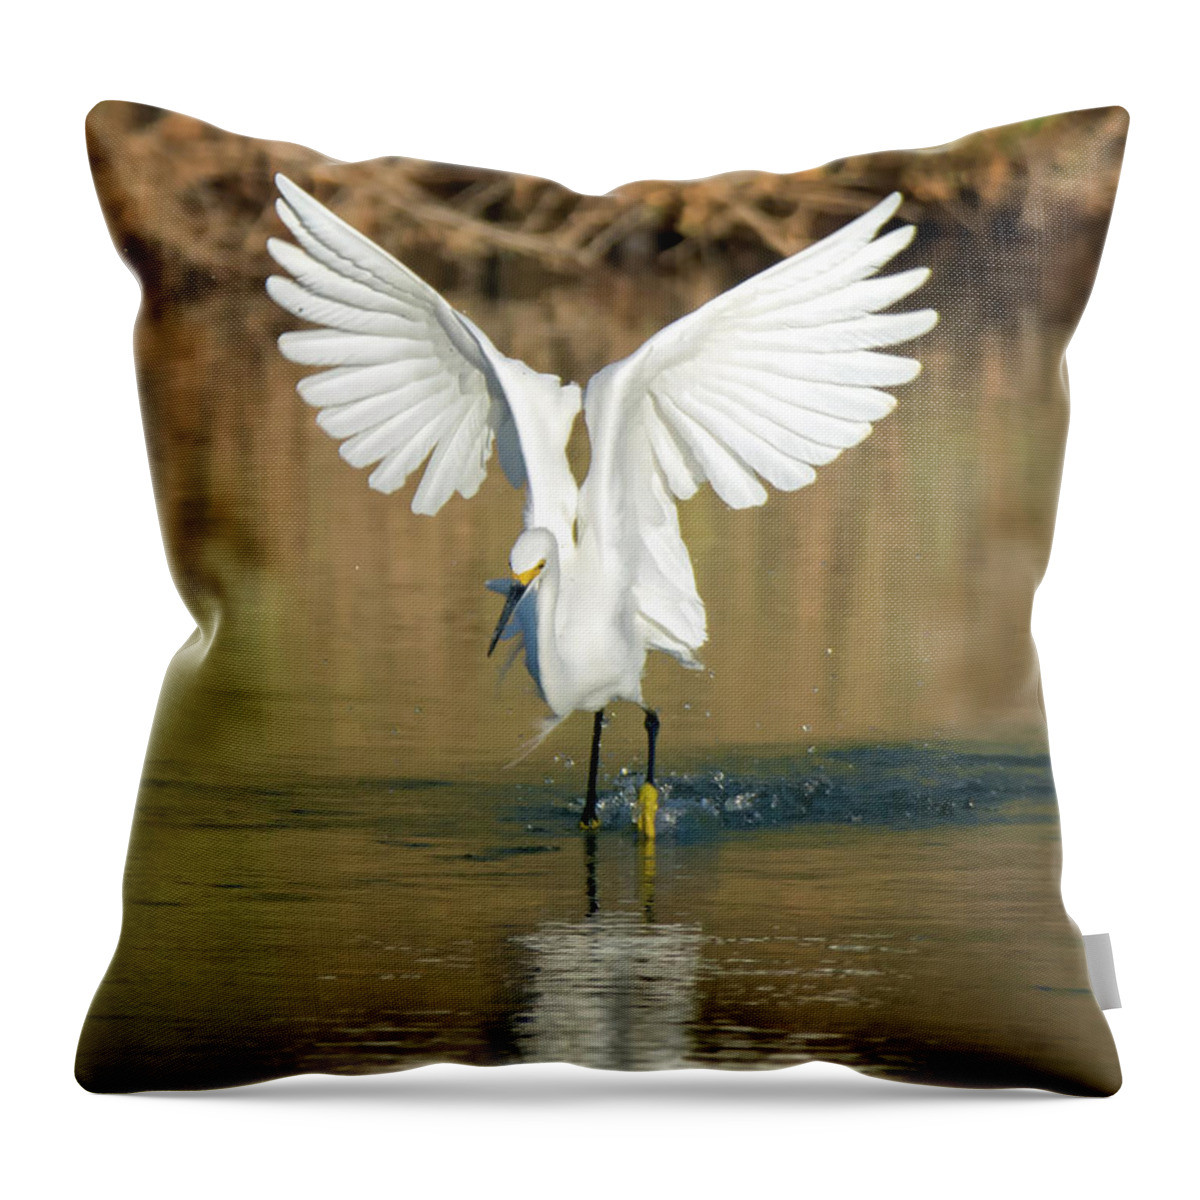 Snowy Throw Pillow featuring the photograph Snowy Egret #74 by Tam Ryan